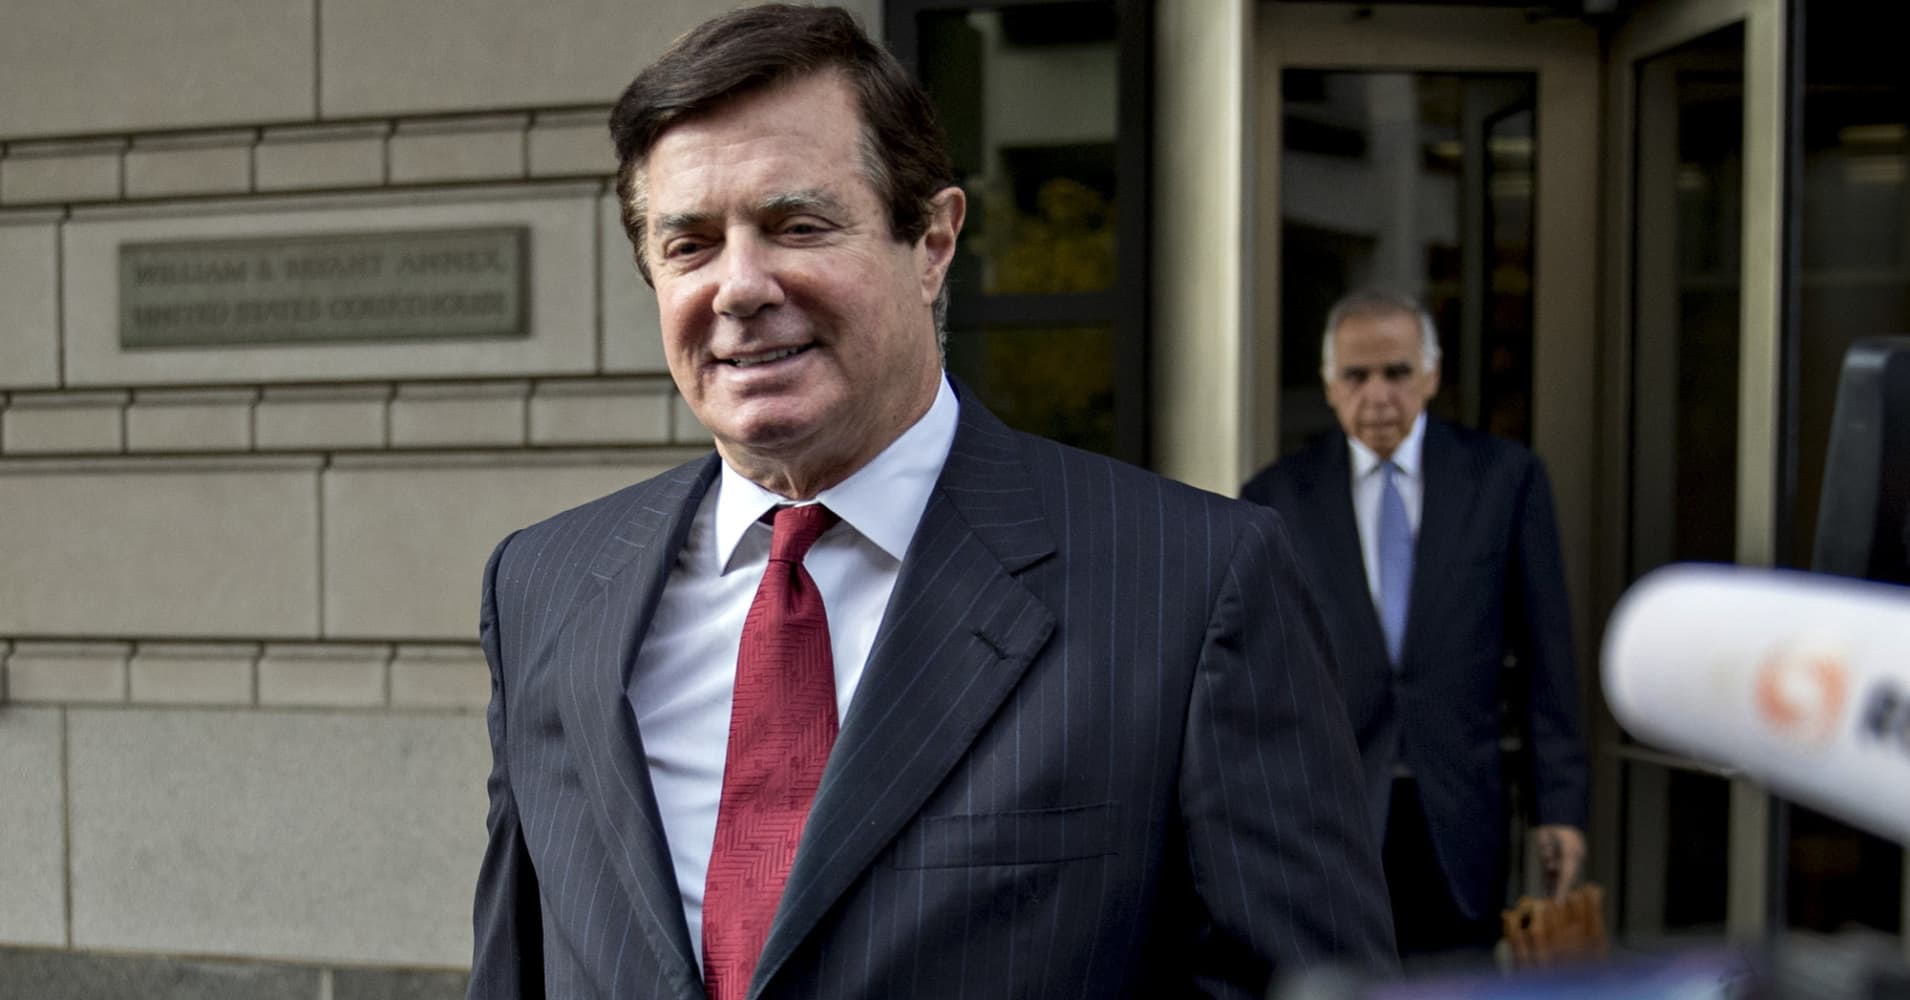 Mueller lays out 5 ways ex-Trump campaign chairman Paul Manafort allegedly lied